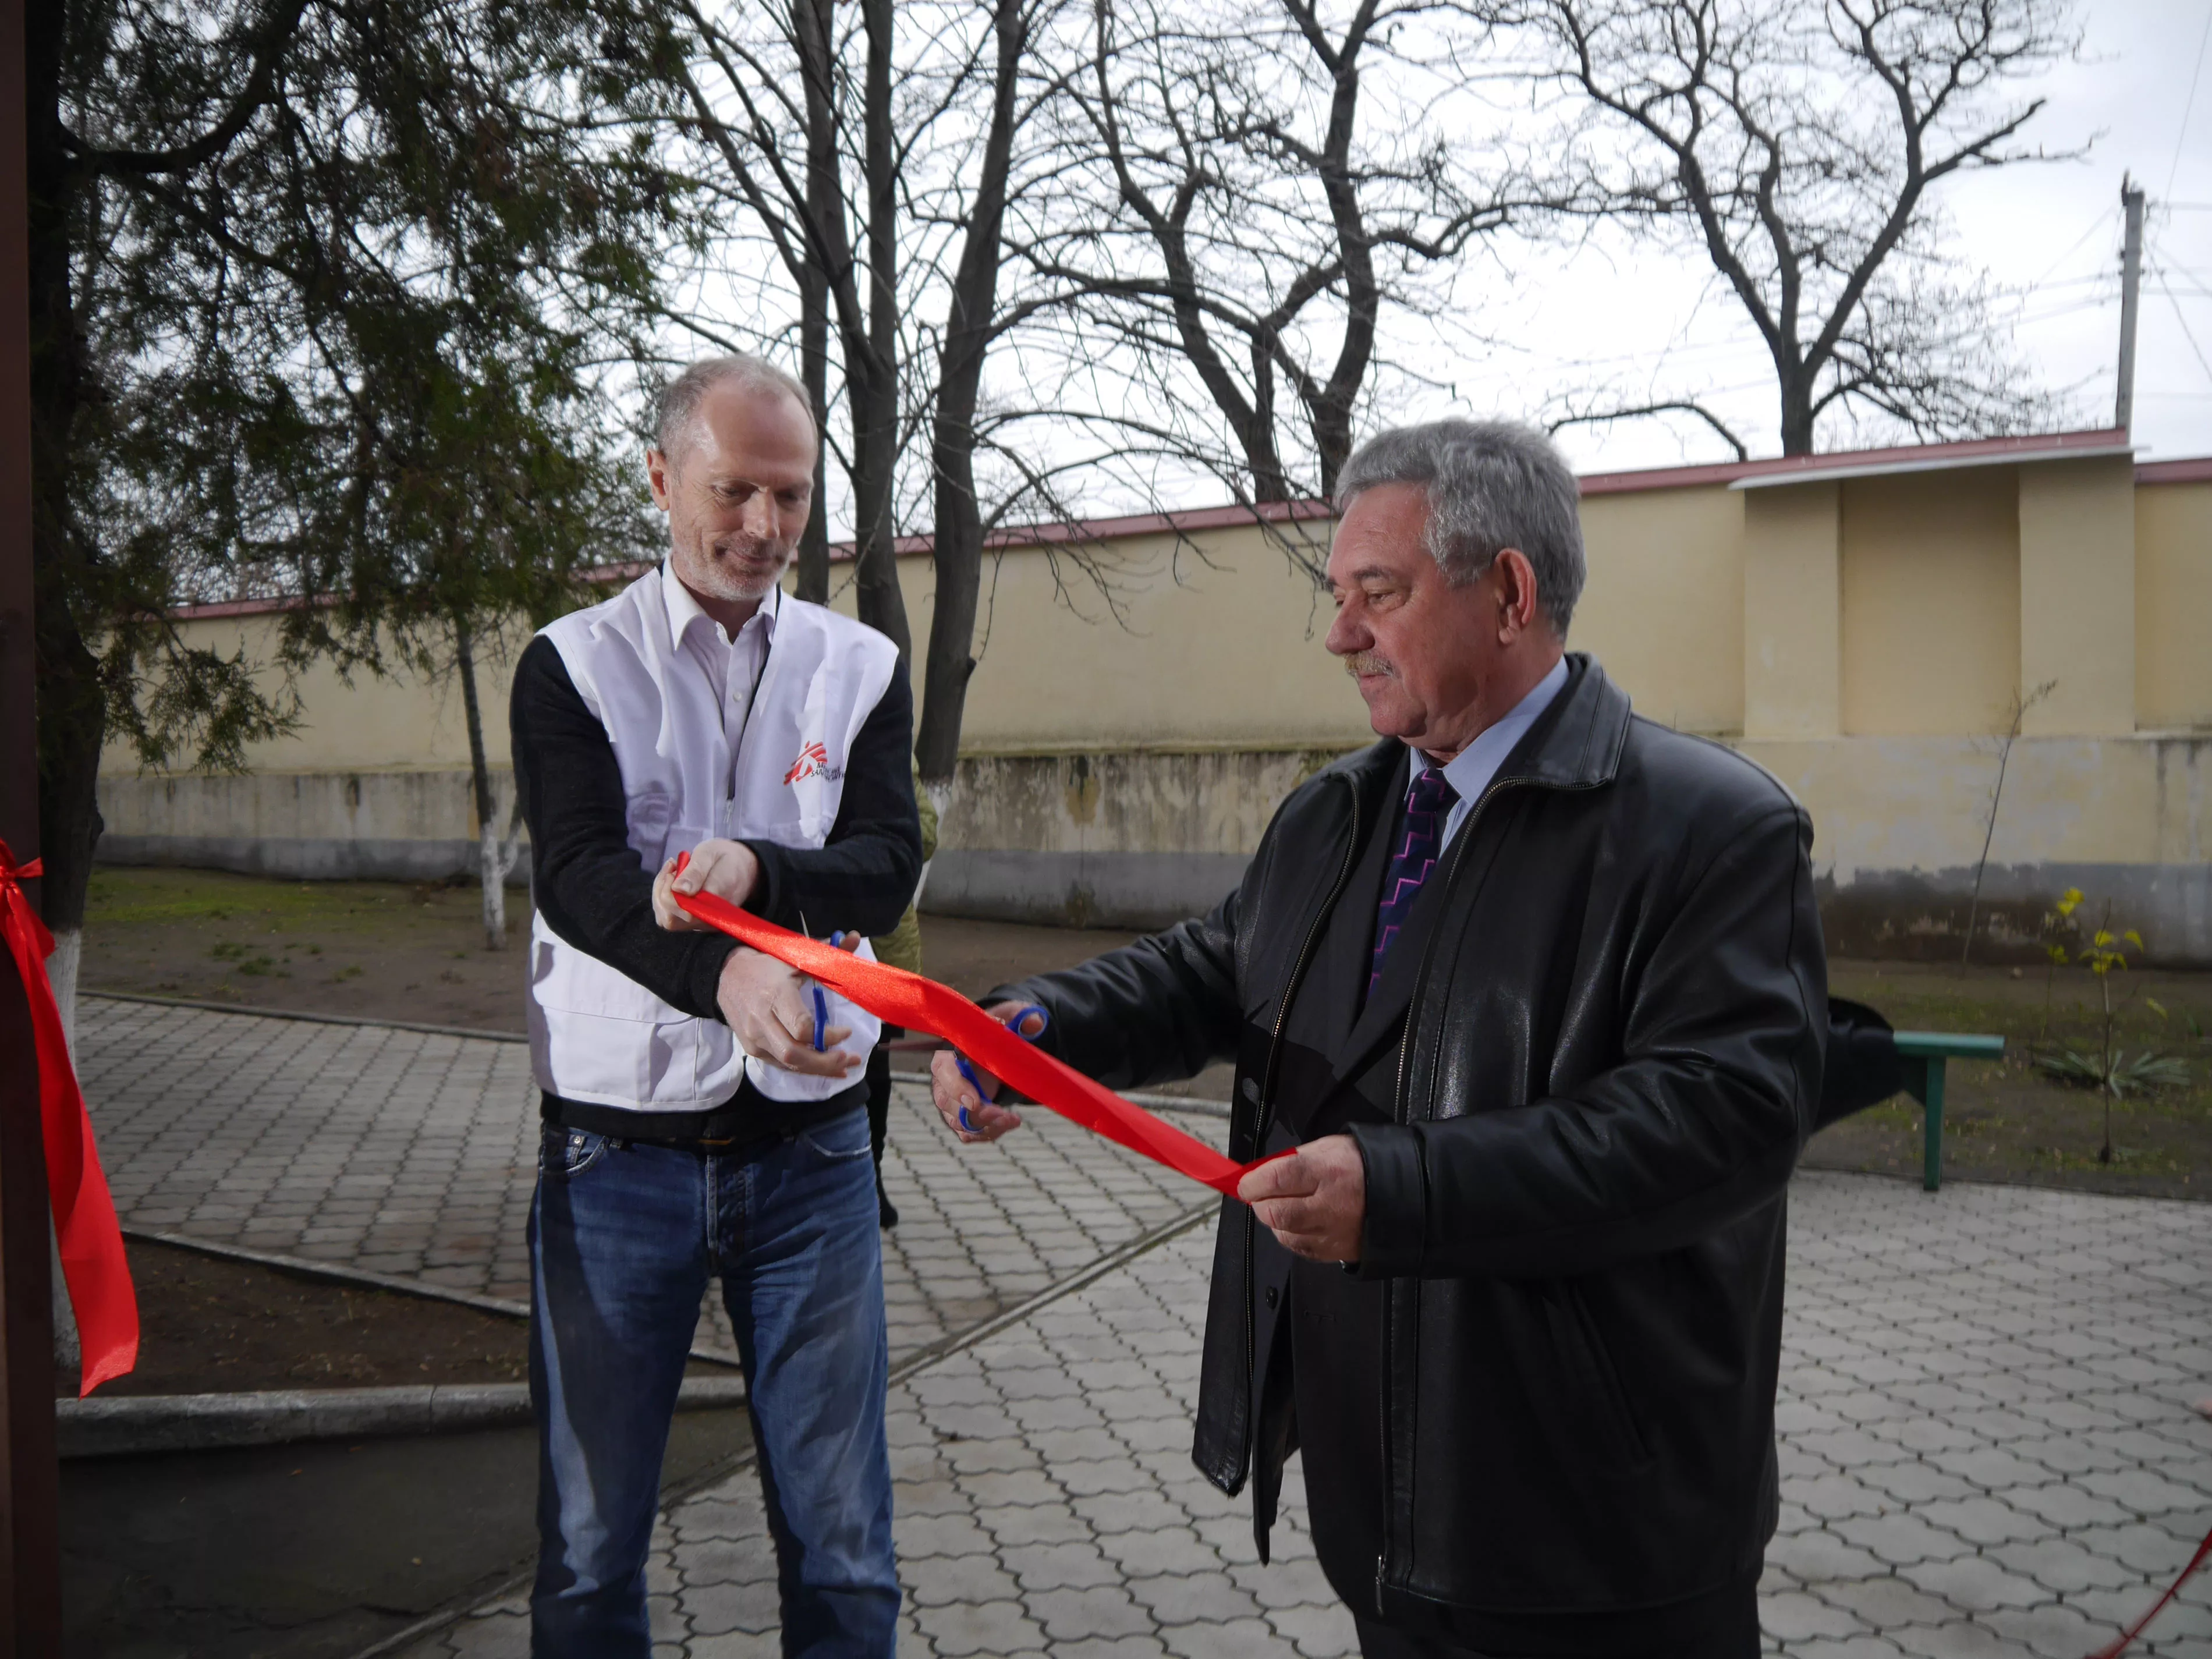 Mark Walsh, head of mission for MSF in Ukraine officially opening MSF’s project with Ivan Dudla, medical specialist from the regional health authorities in Mykolaiv.